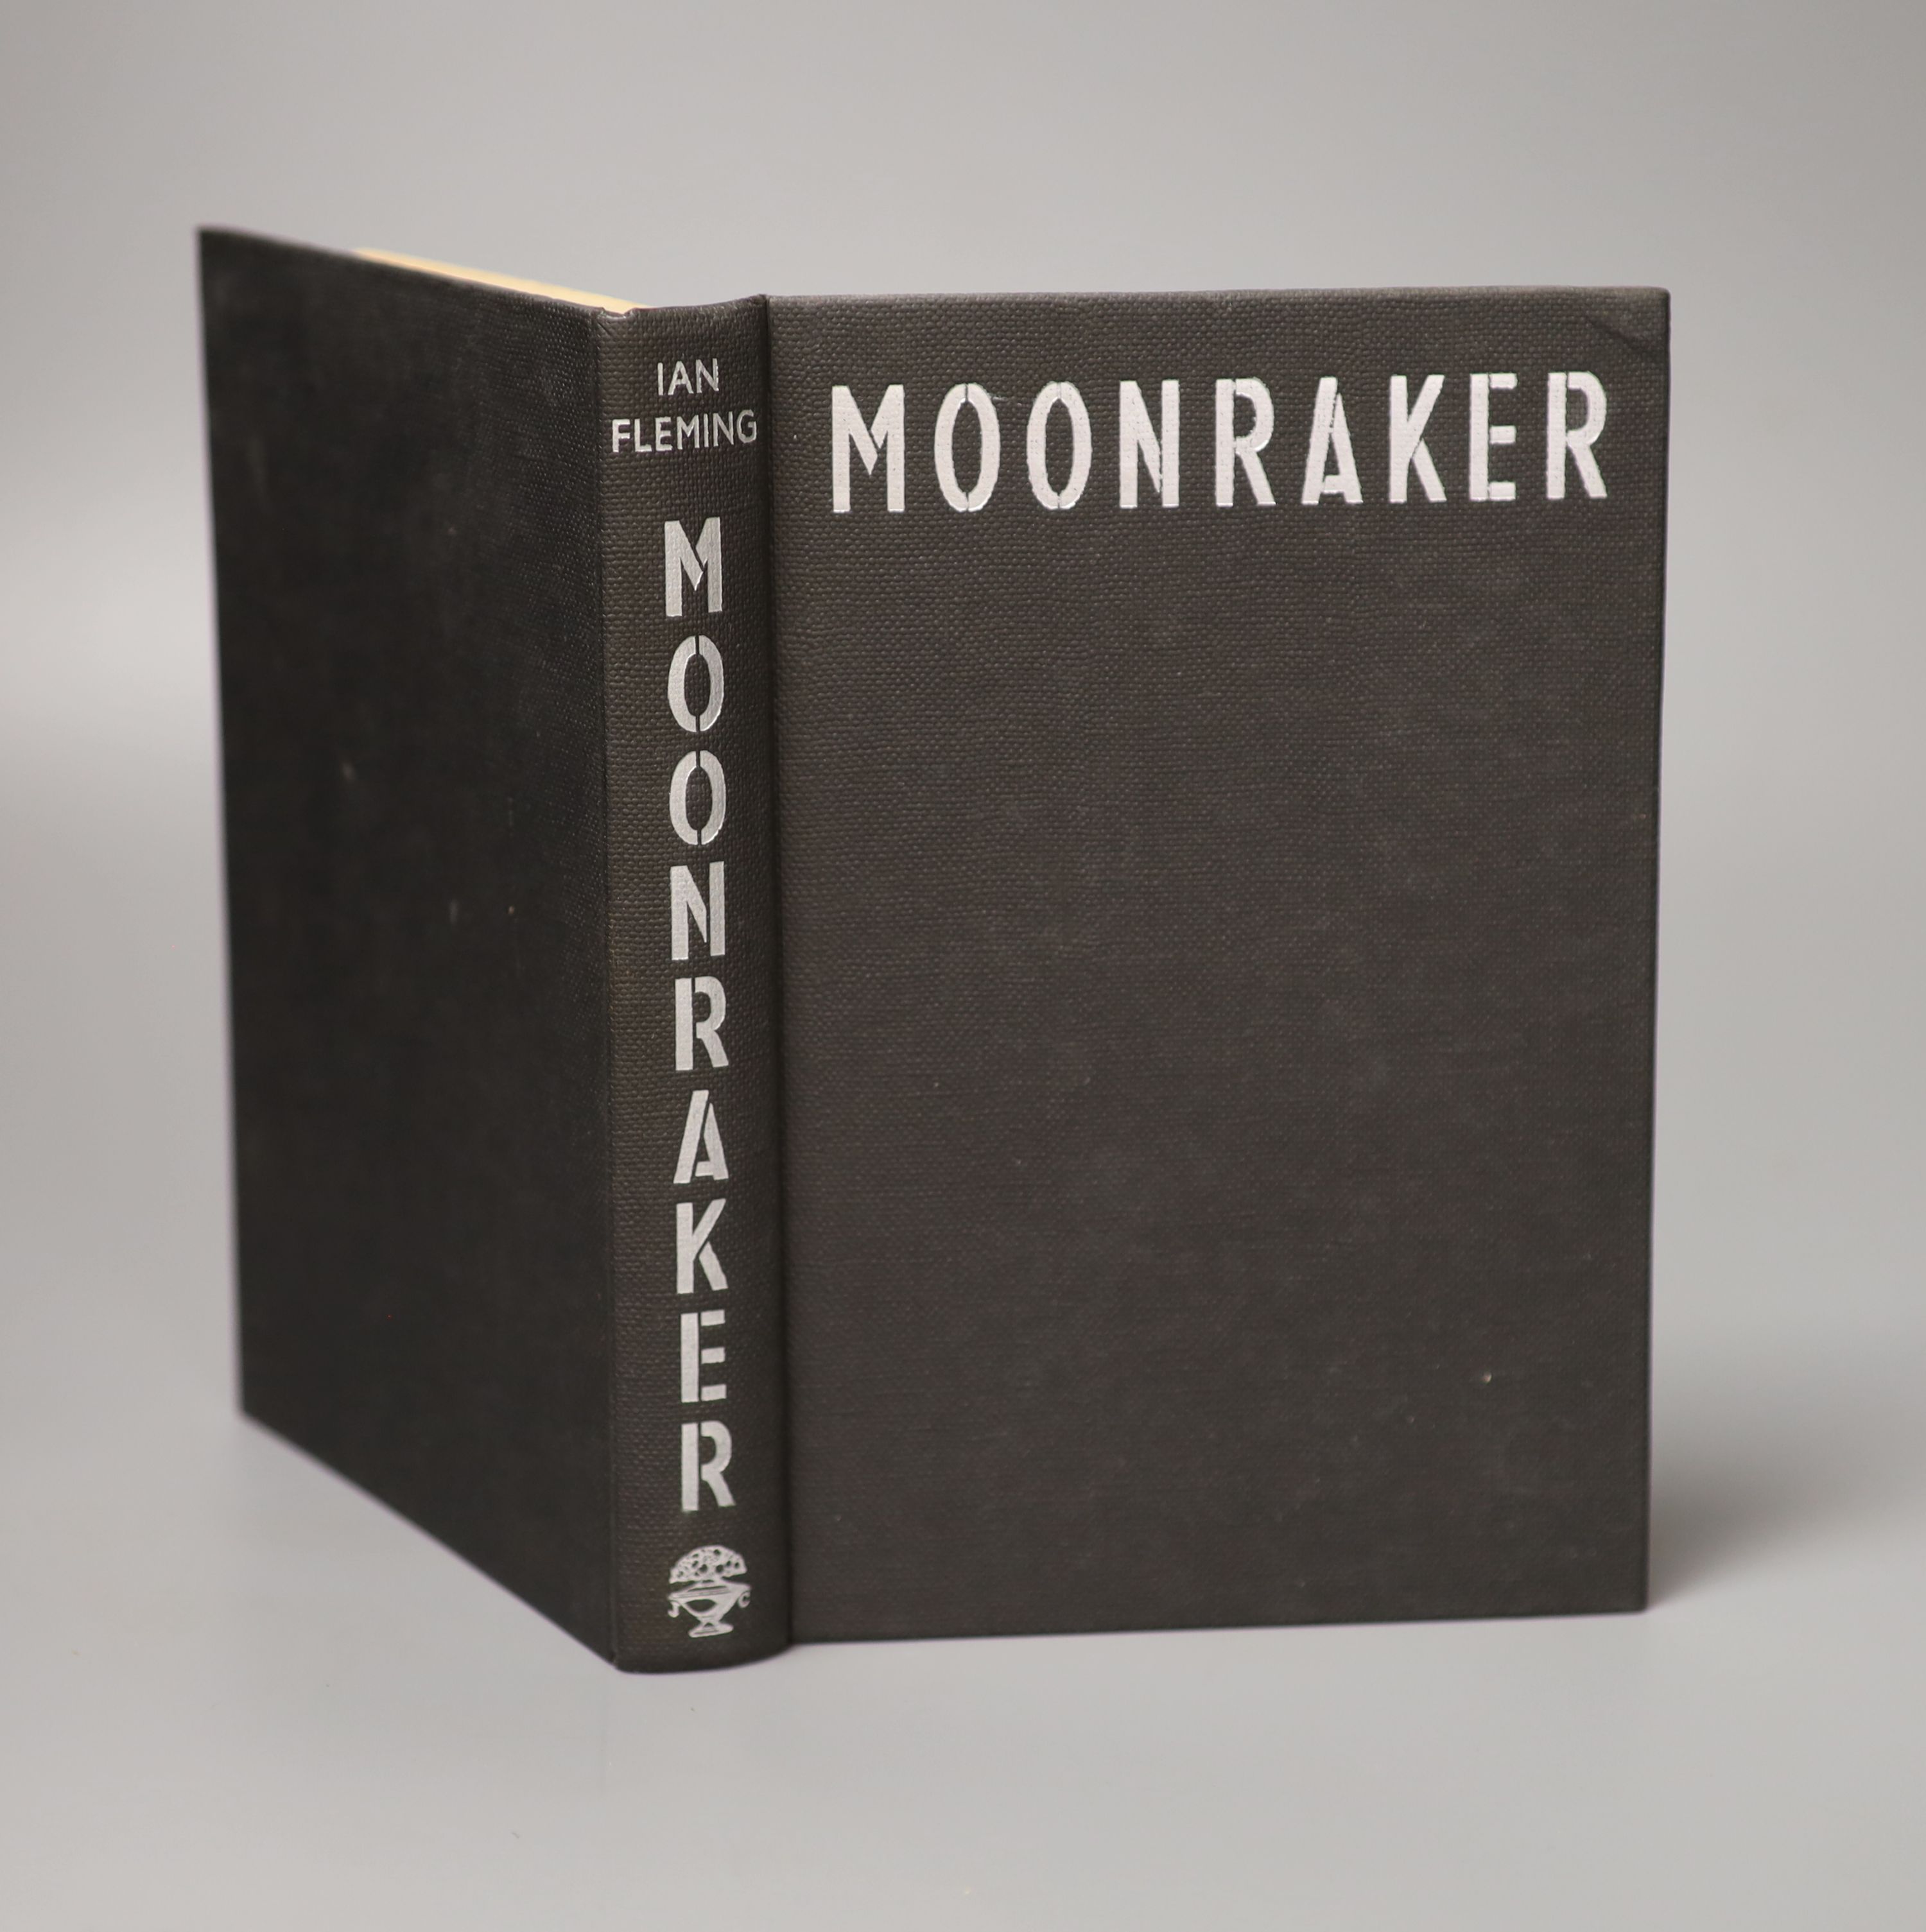 Fleming, Ian - Moonraker, 1st edition, 2nd state, original black cloth with silver titles, London, 1955